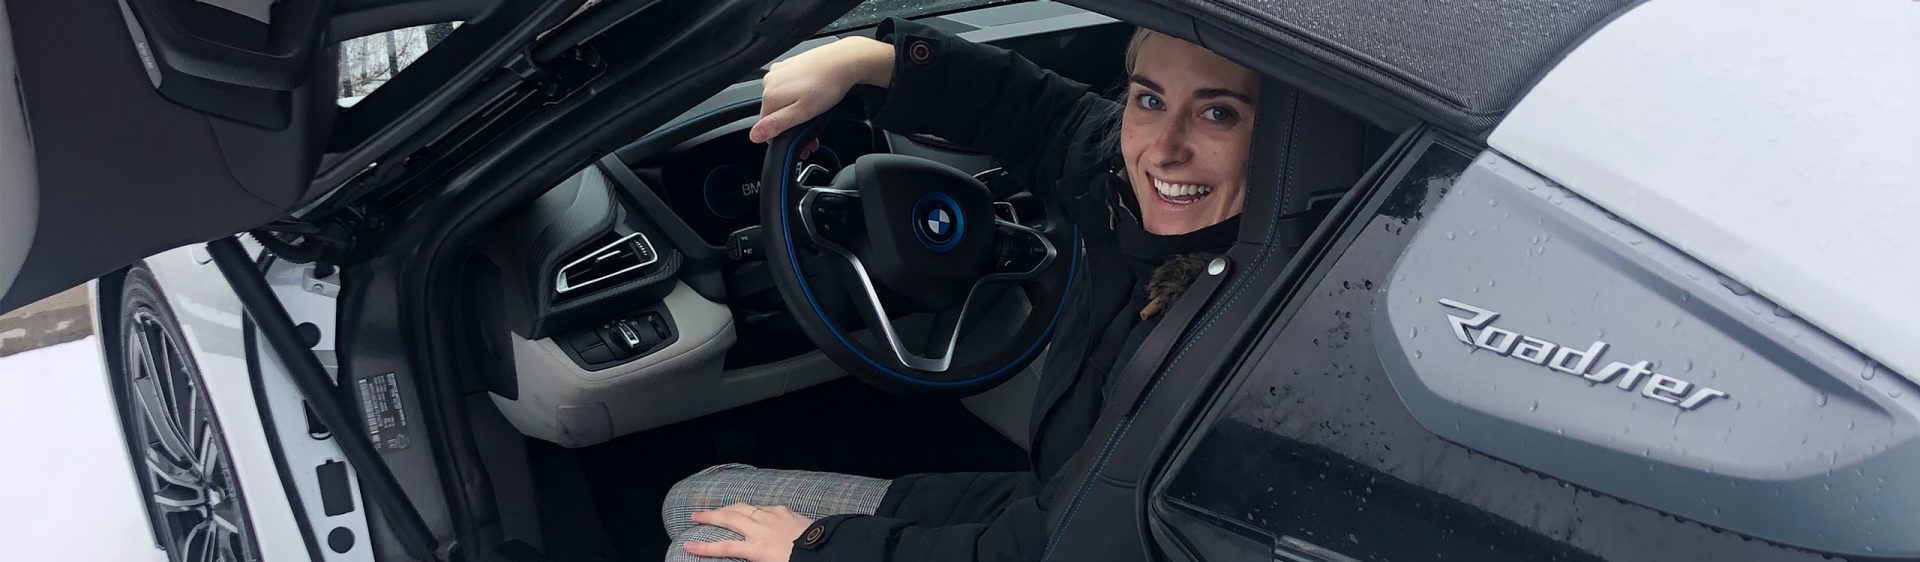 The image shows Riley Weichel, an Experiential Marketing intern at BMW.